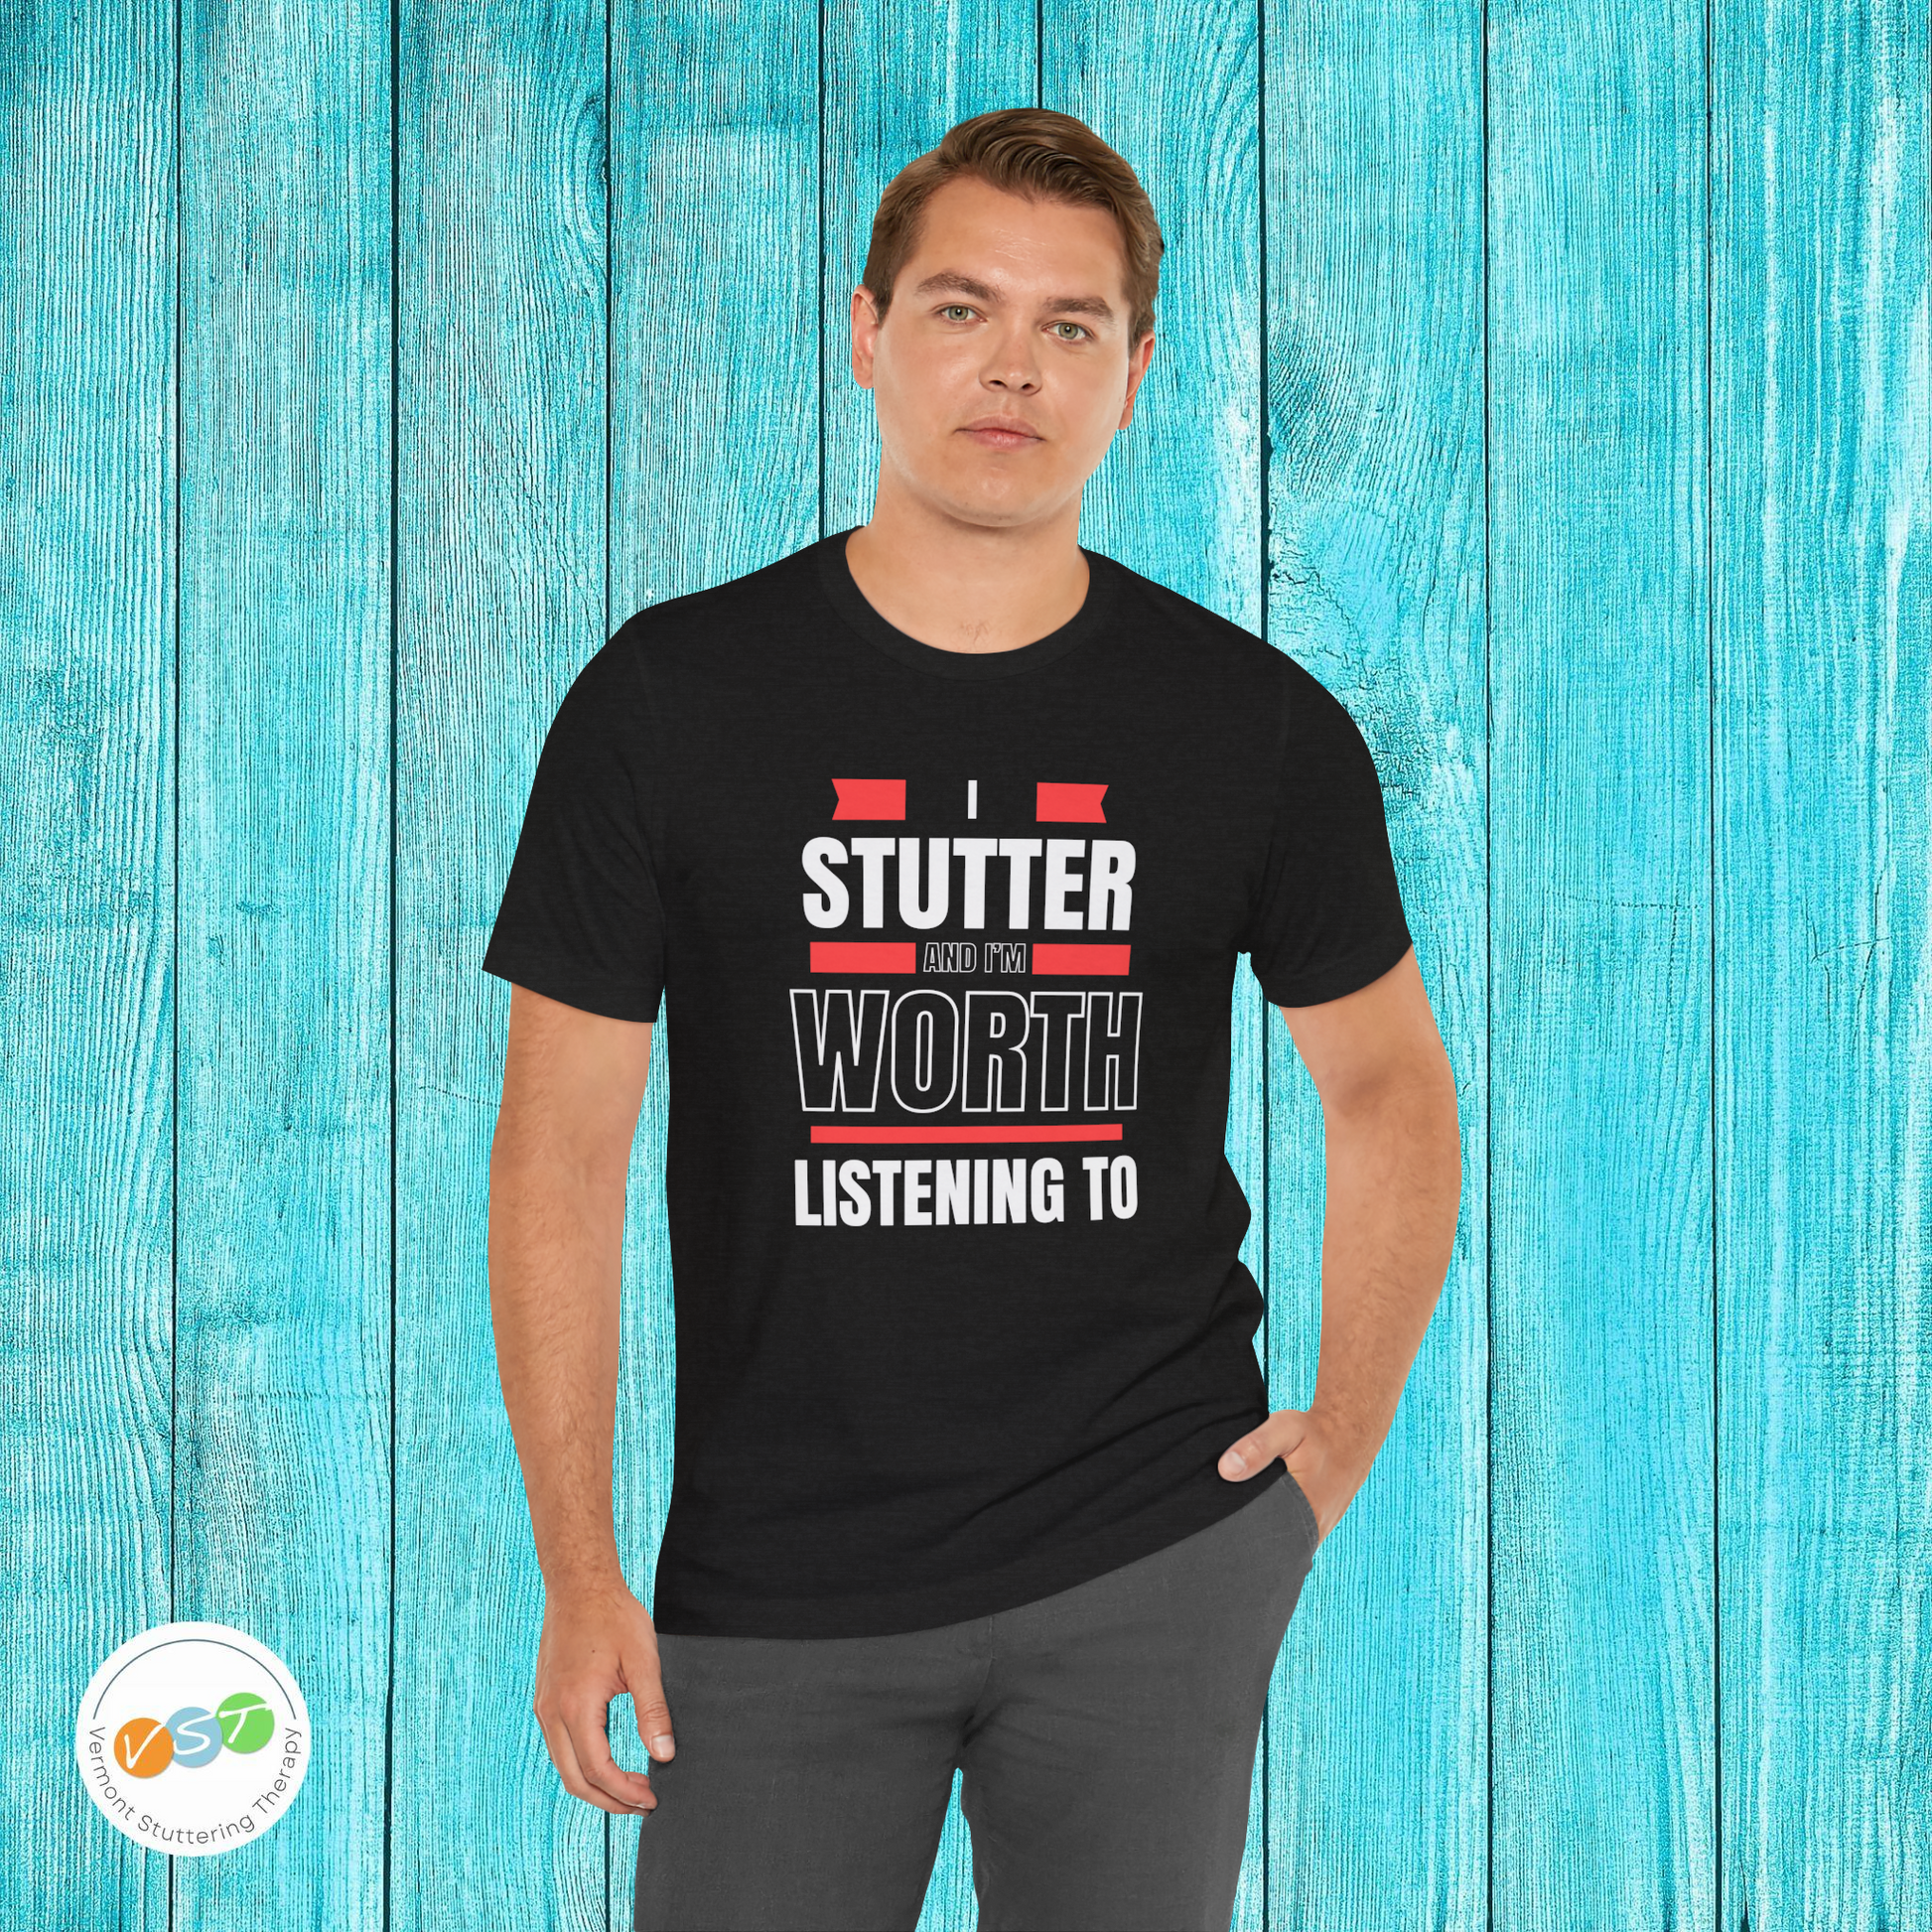 I Stutter and I'm Worth Listening To - Normalize Stuttering Challenge T-Shirt #normalizestutteringchallenge